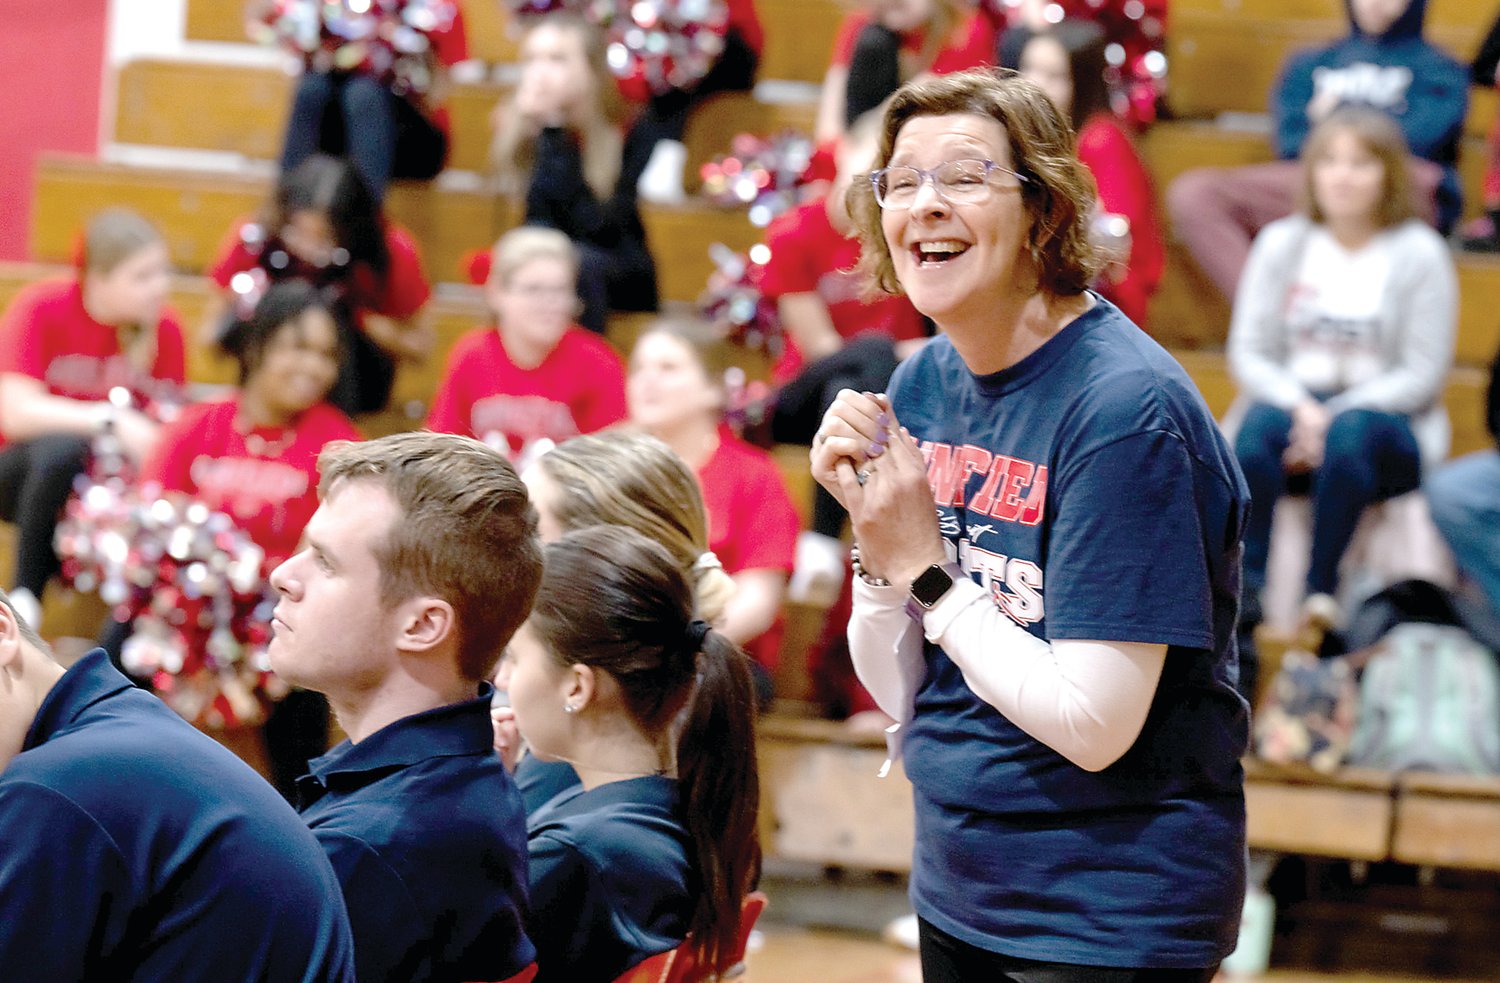 Central Bucks East Unified Sports Coach Jen Dougherty cheers on players during the bocce match. CB East took the top prize March 3. Participants were part of a Special Olympics program that, according to its website, promotes social inclusion by bringing together students with and without disabilities to train and compete as teammates.